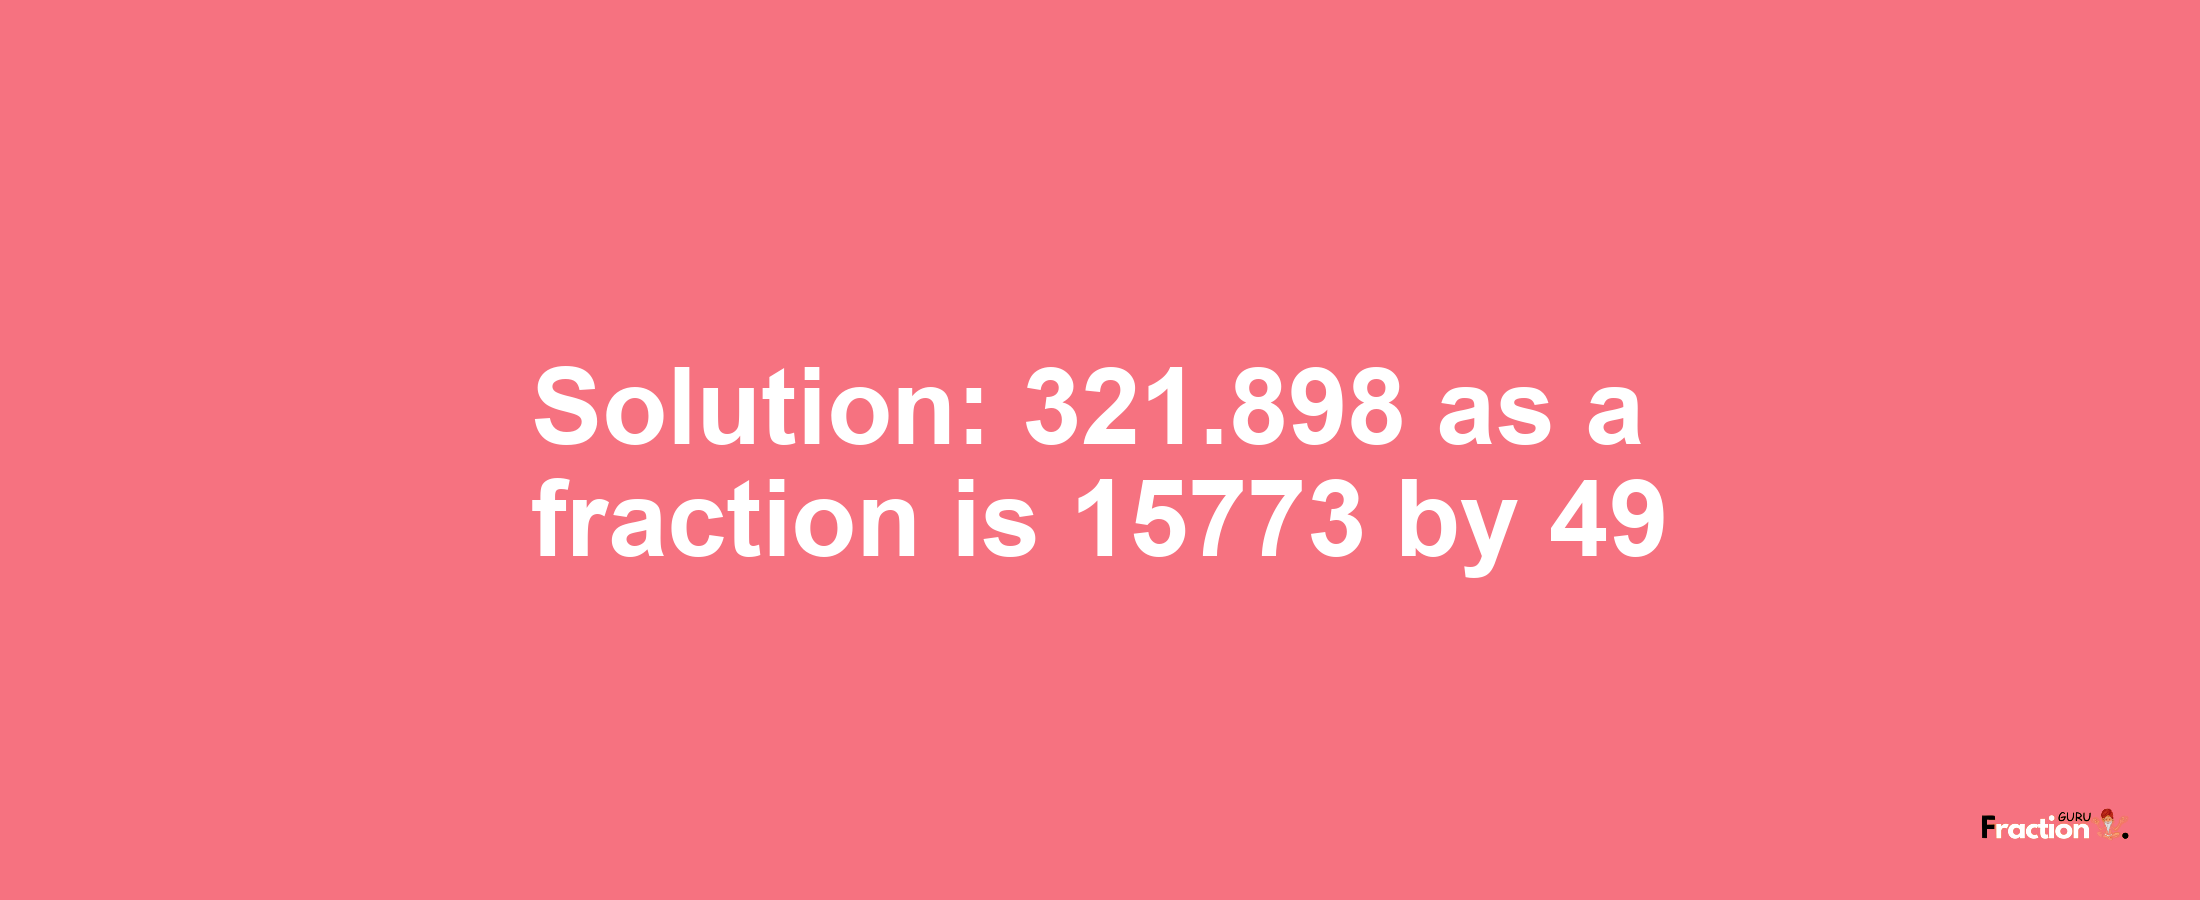 Solution:321.898 as a fraction is 15773/49